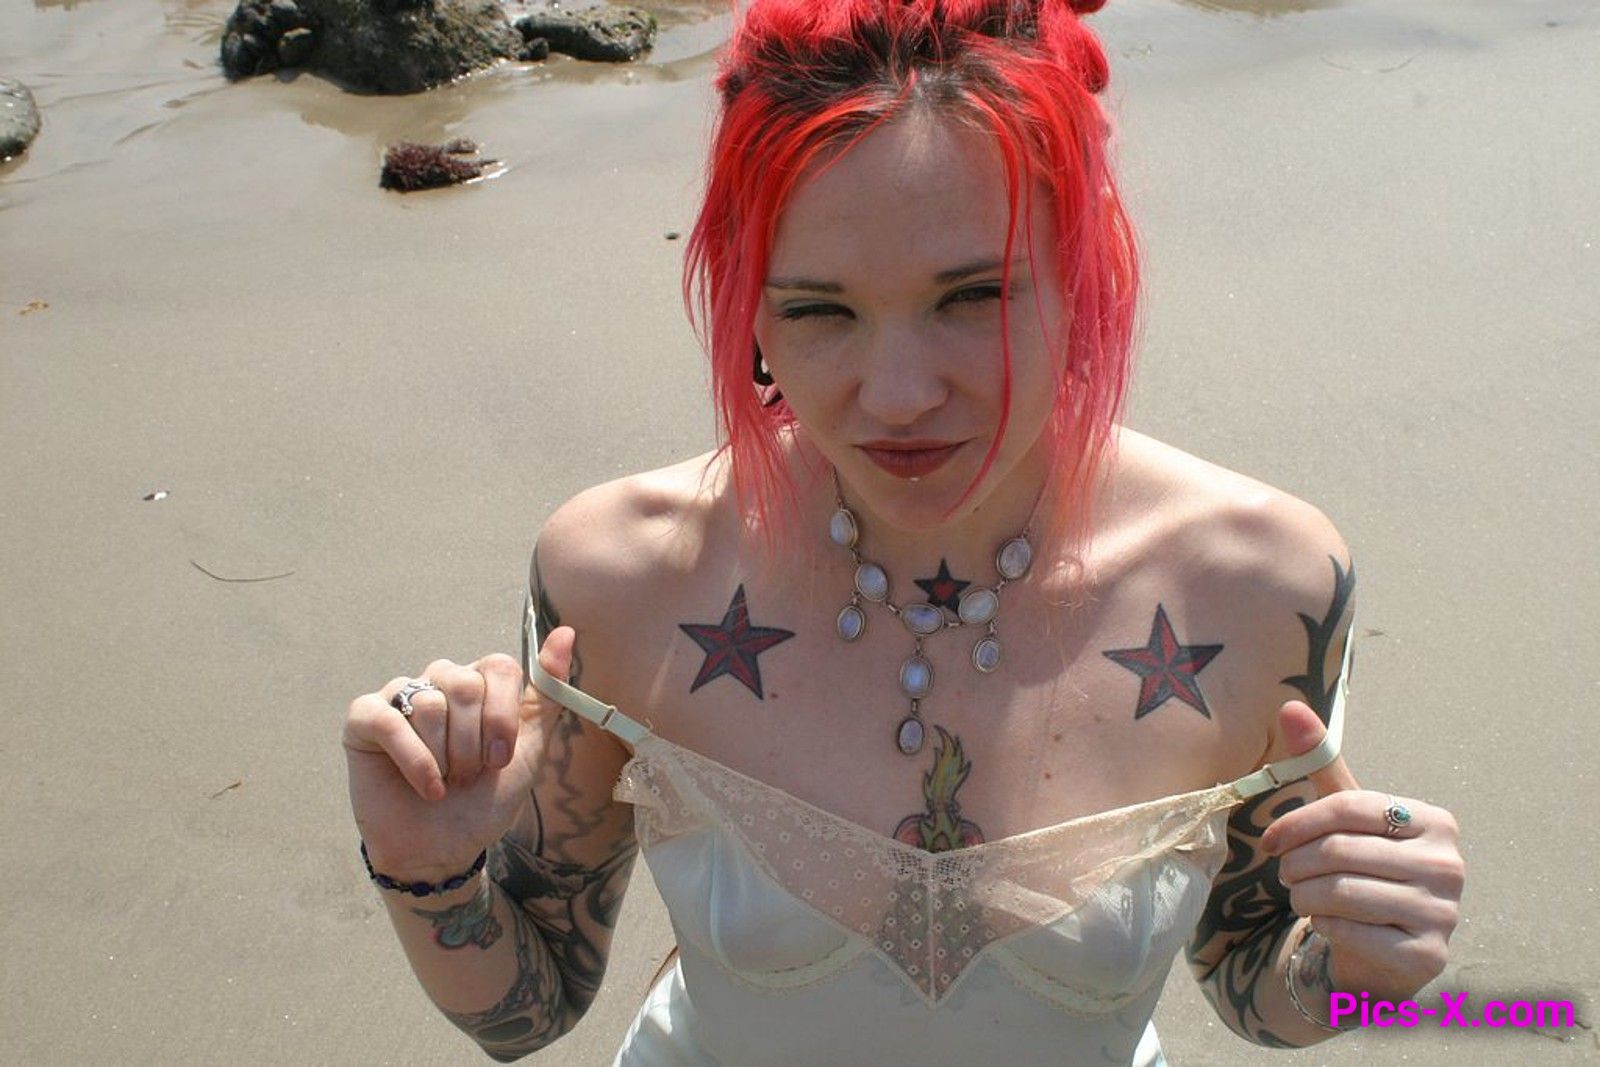 Inked up goth girl playing in the waves at a beach - Punk Rock Girlfriend - Image 12